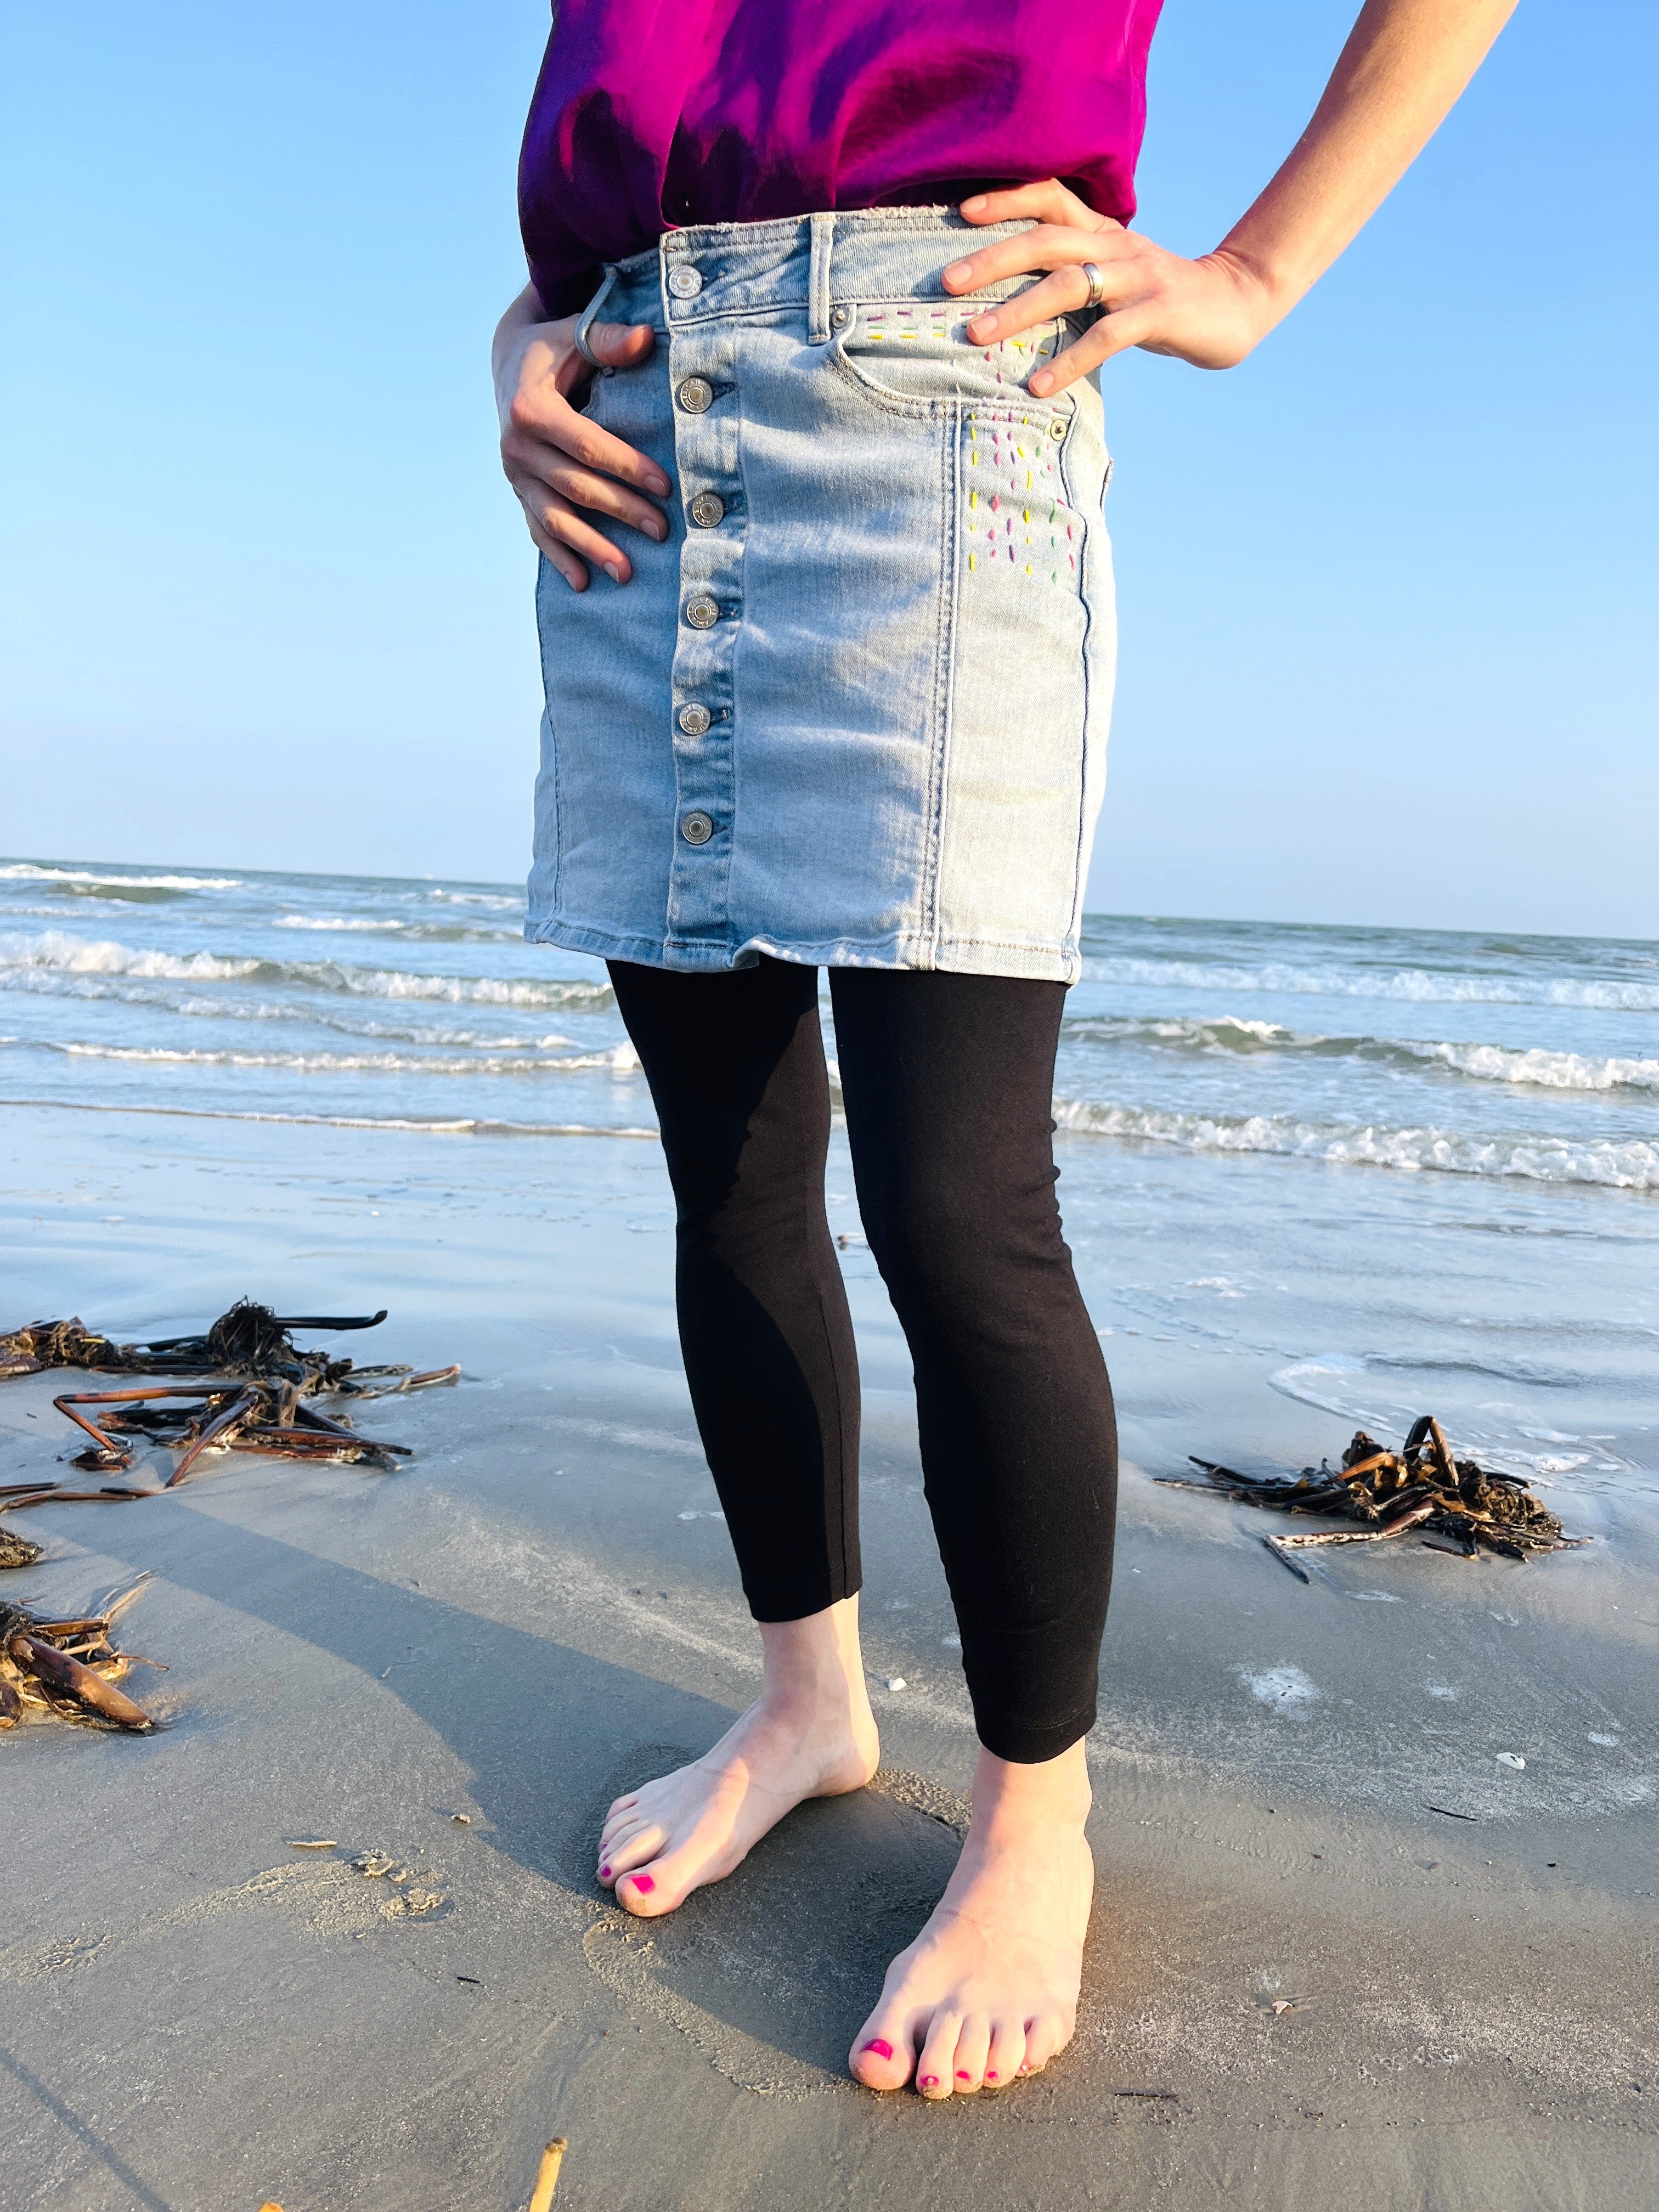 Chic Handstitched Upcycled Jean Skirt – Your New Wardrobe Staple